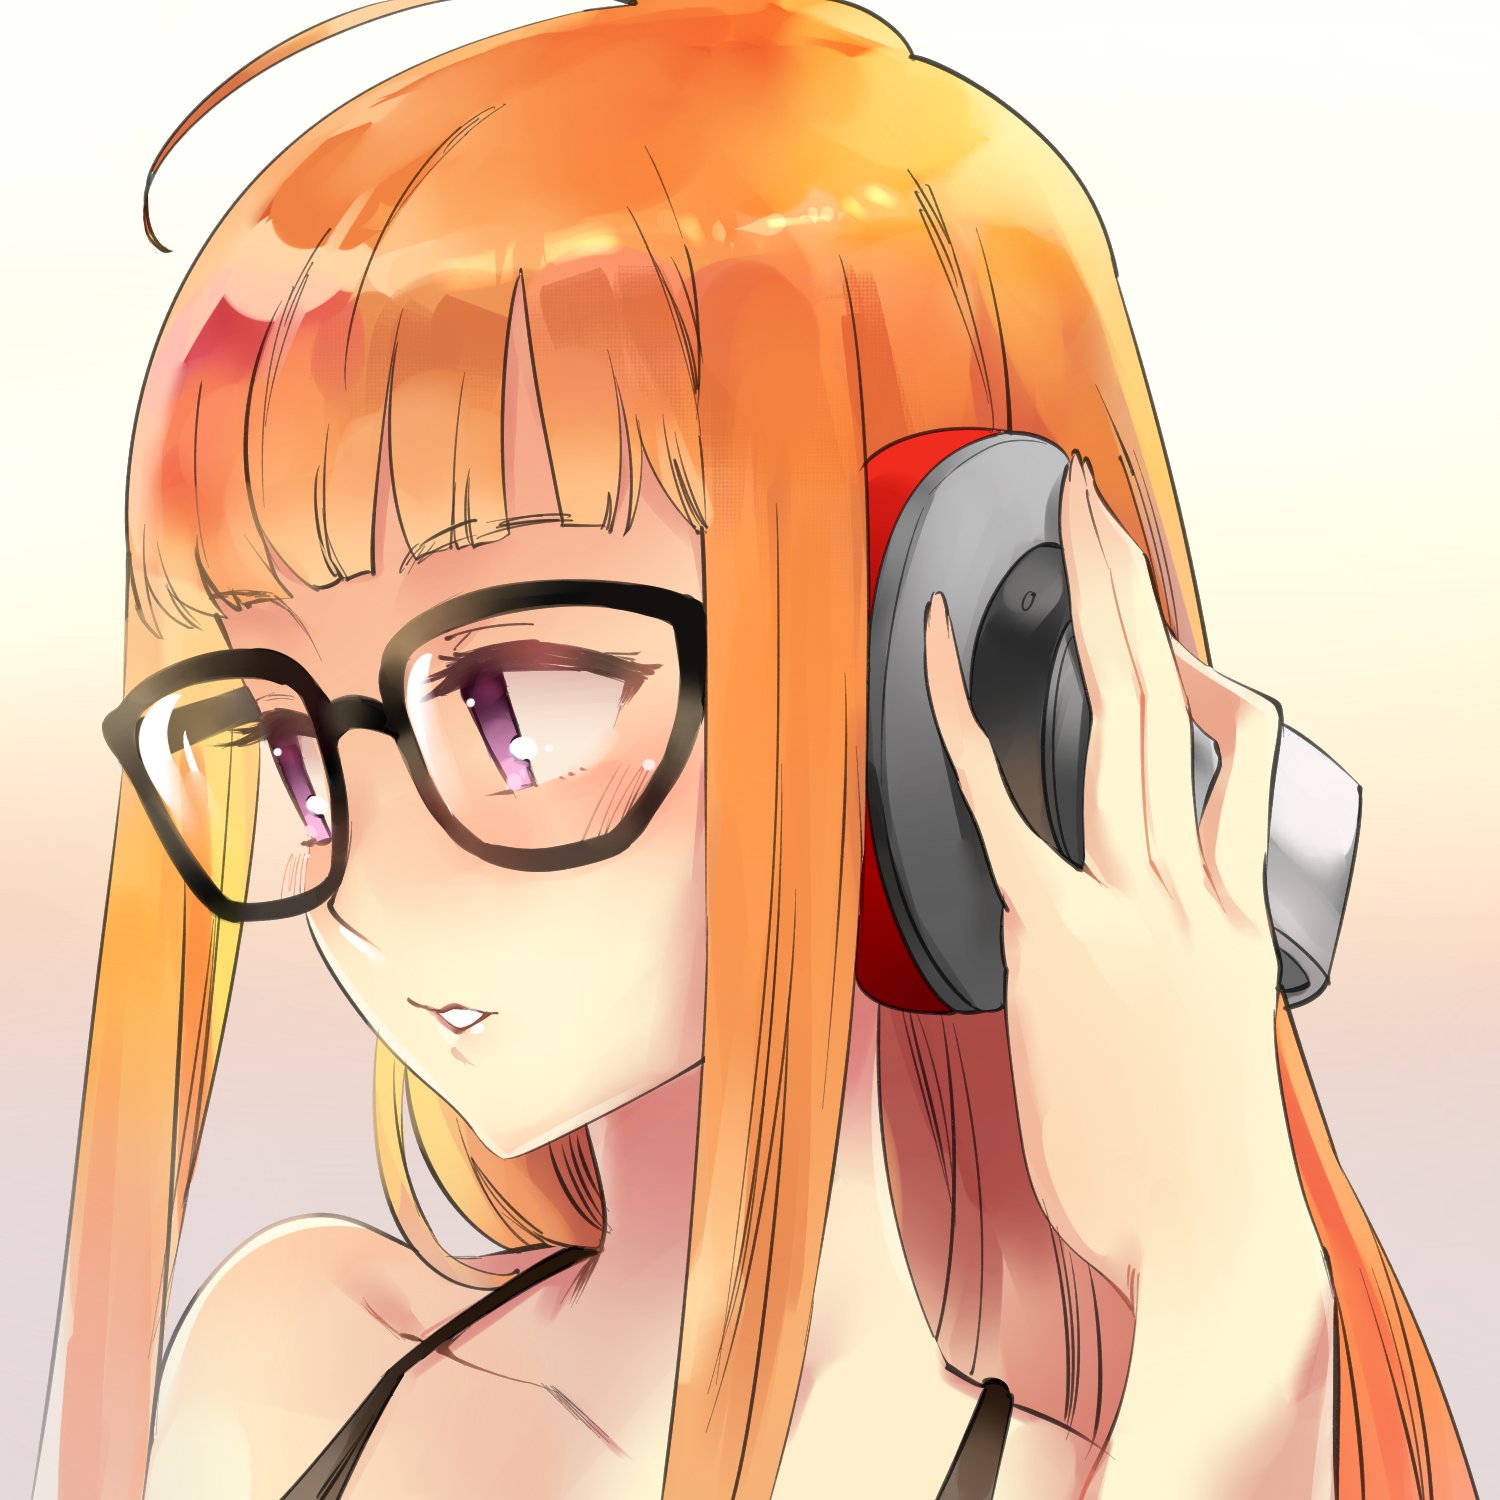 Not very far though lol.Futaba icon I finished the other day. @lonerurouni1...